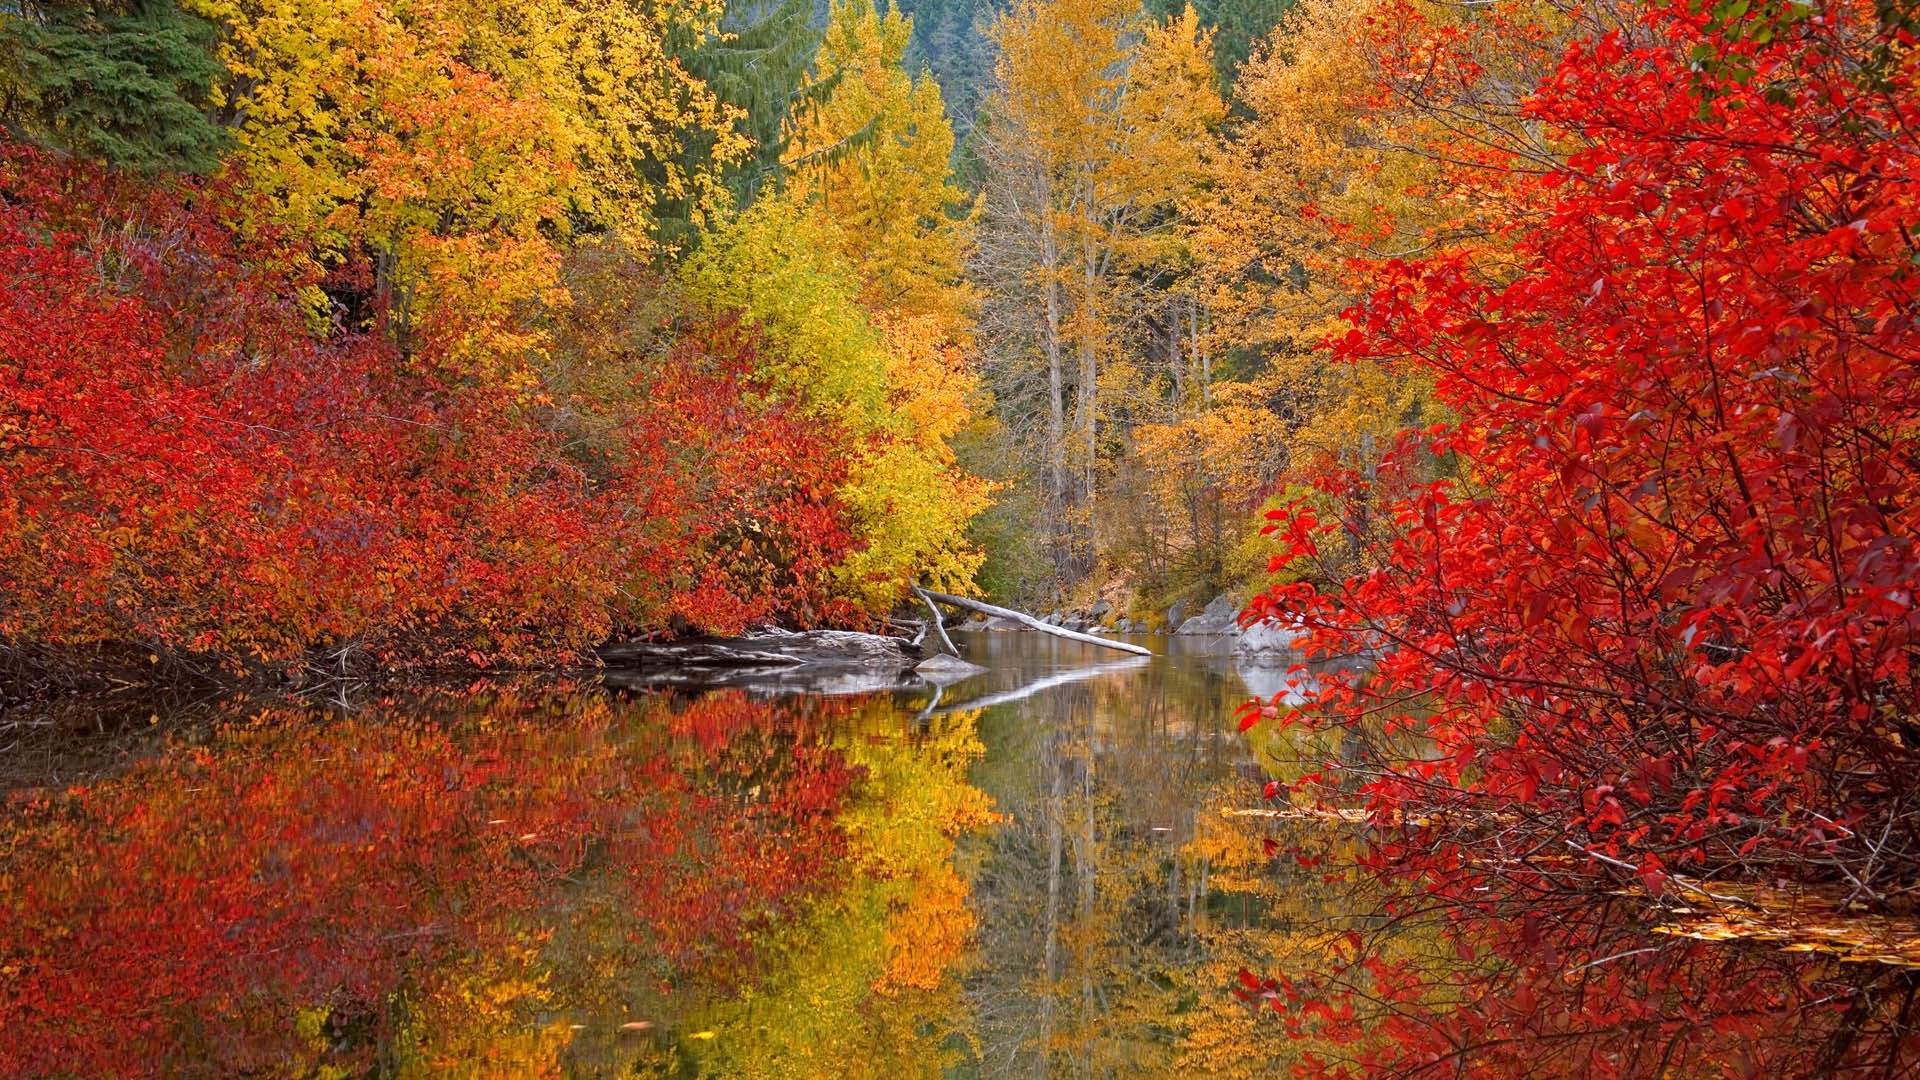 General 1920x1080 nature trees forest lake reflection fall outdoors